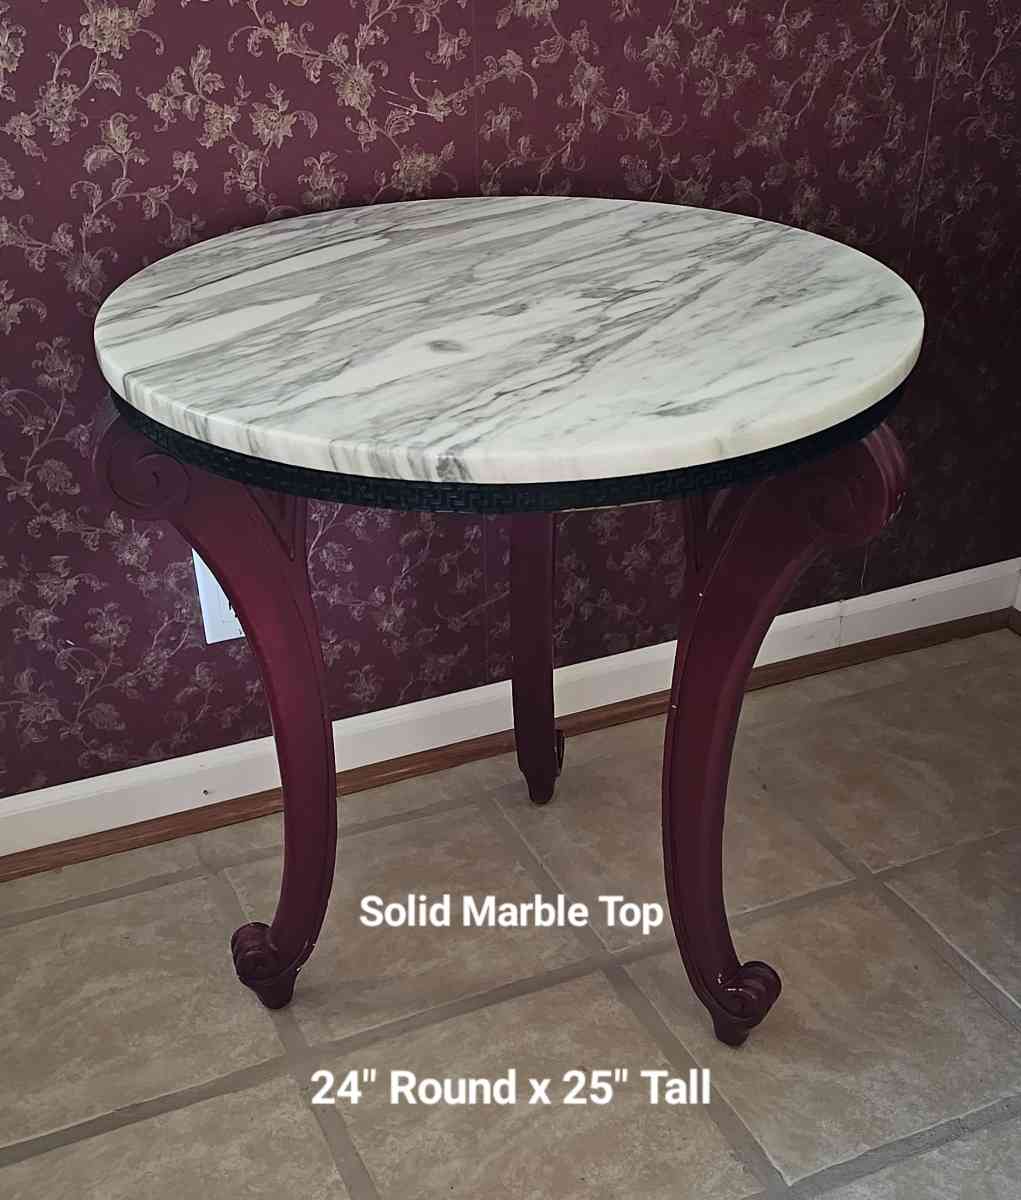 Solid Marble Top Table with wood legs